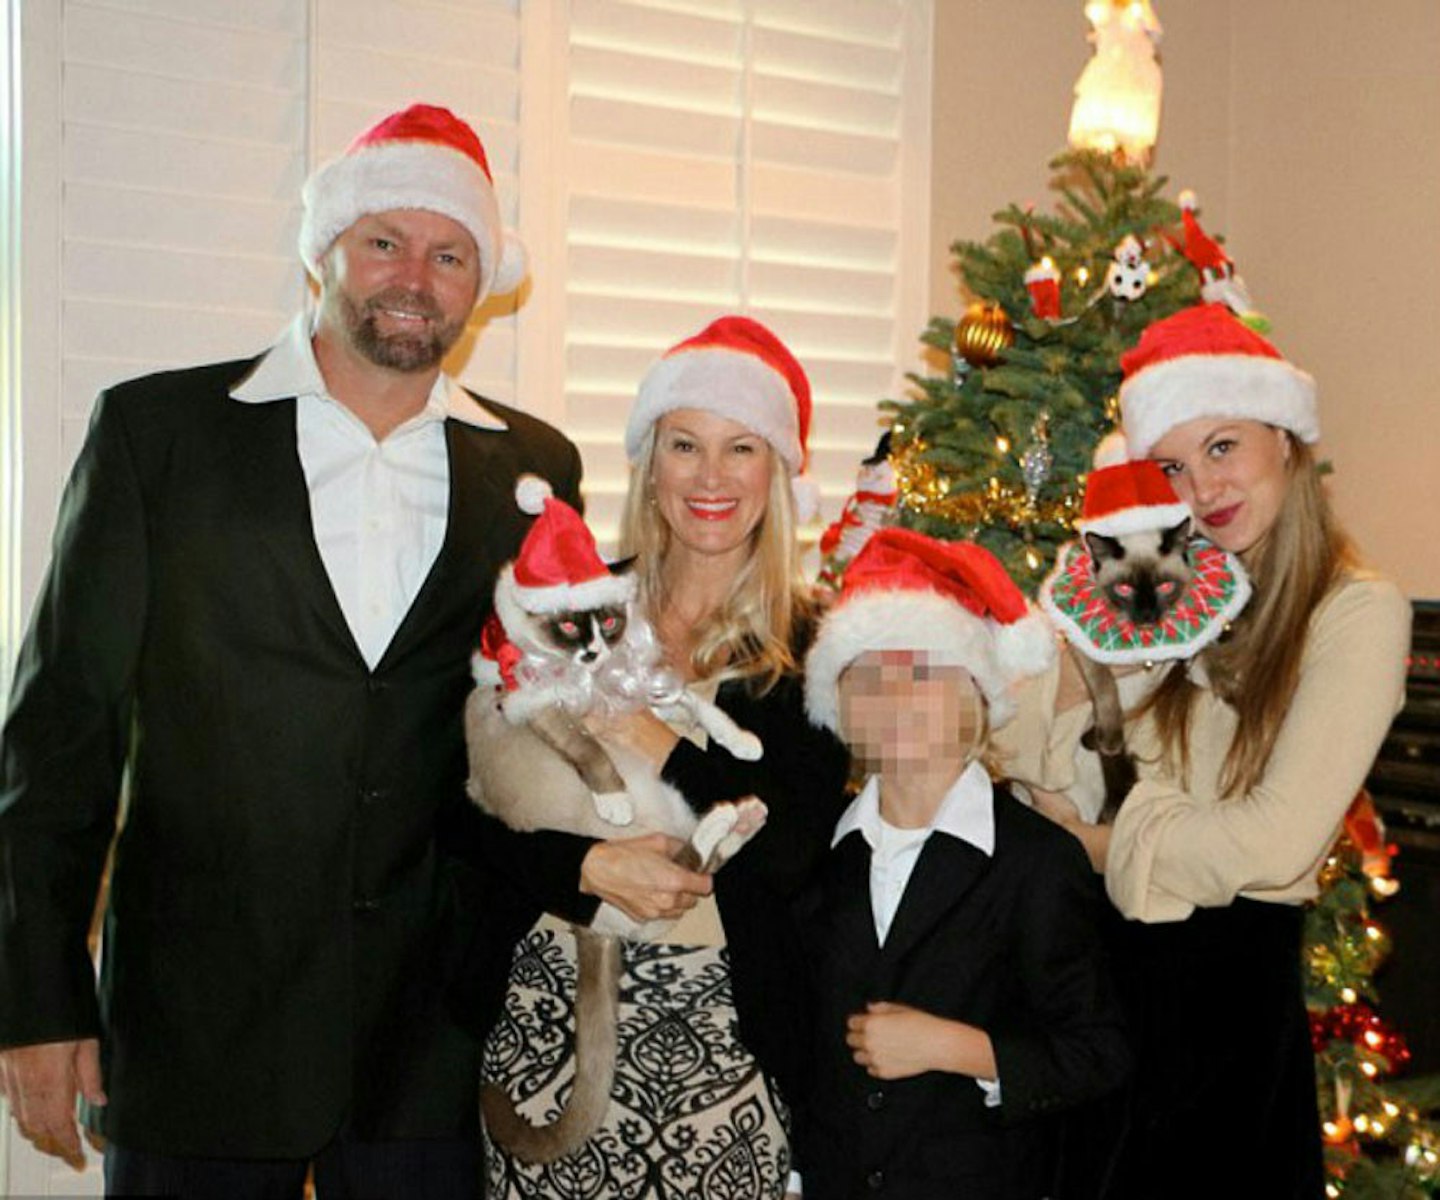 Briana (far right) and her family